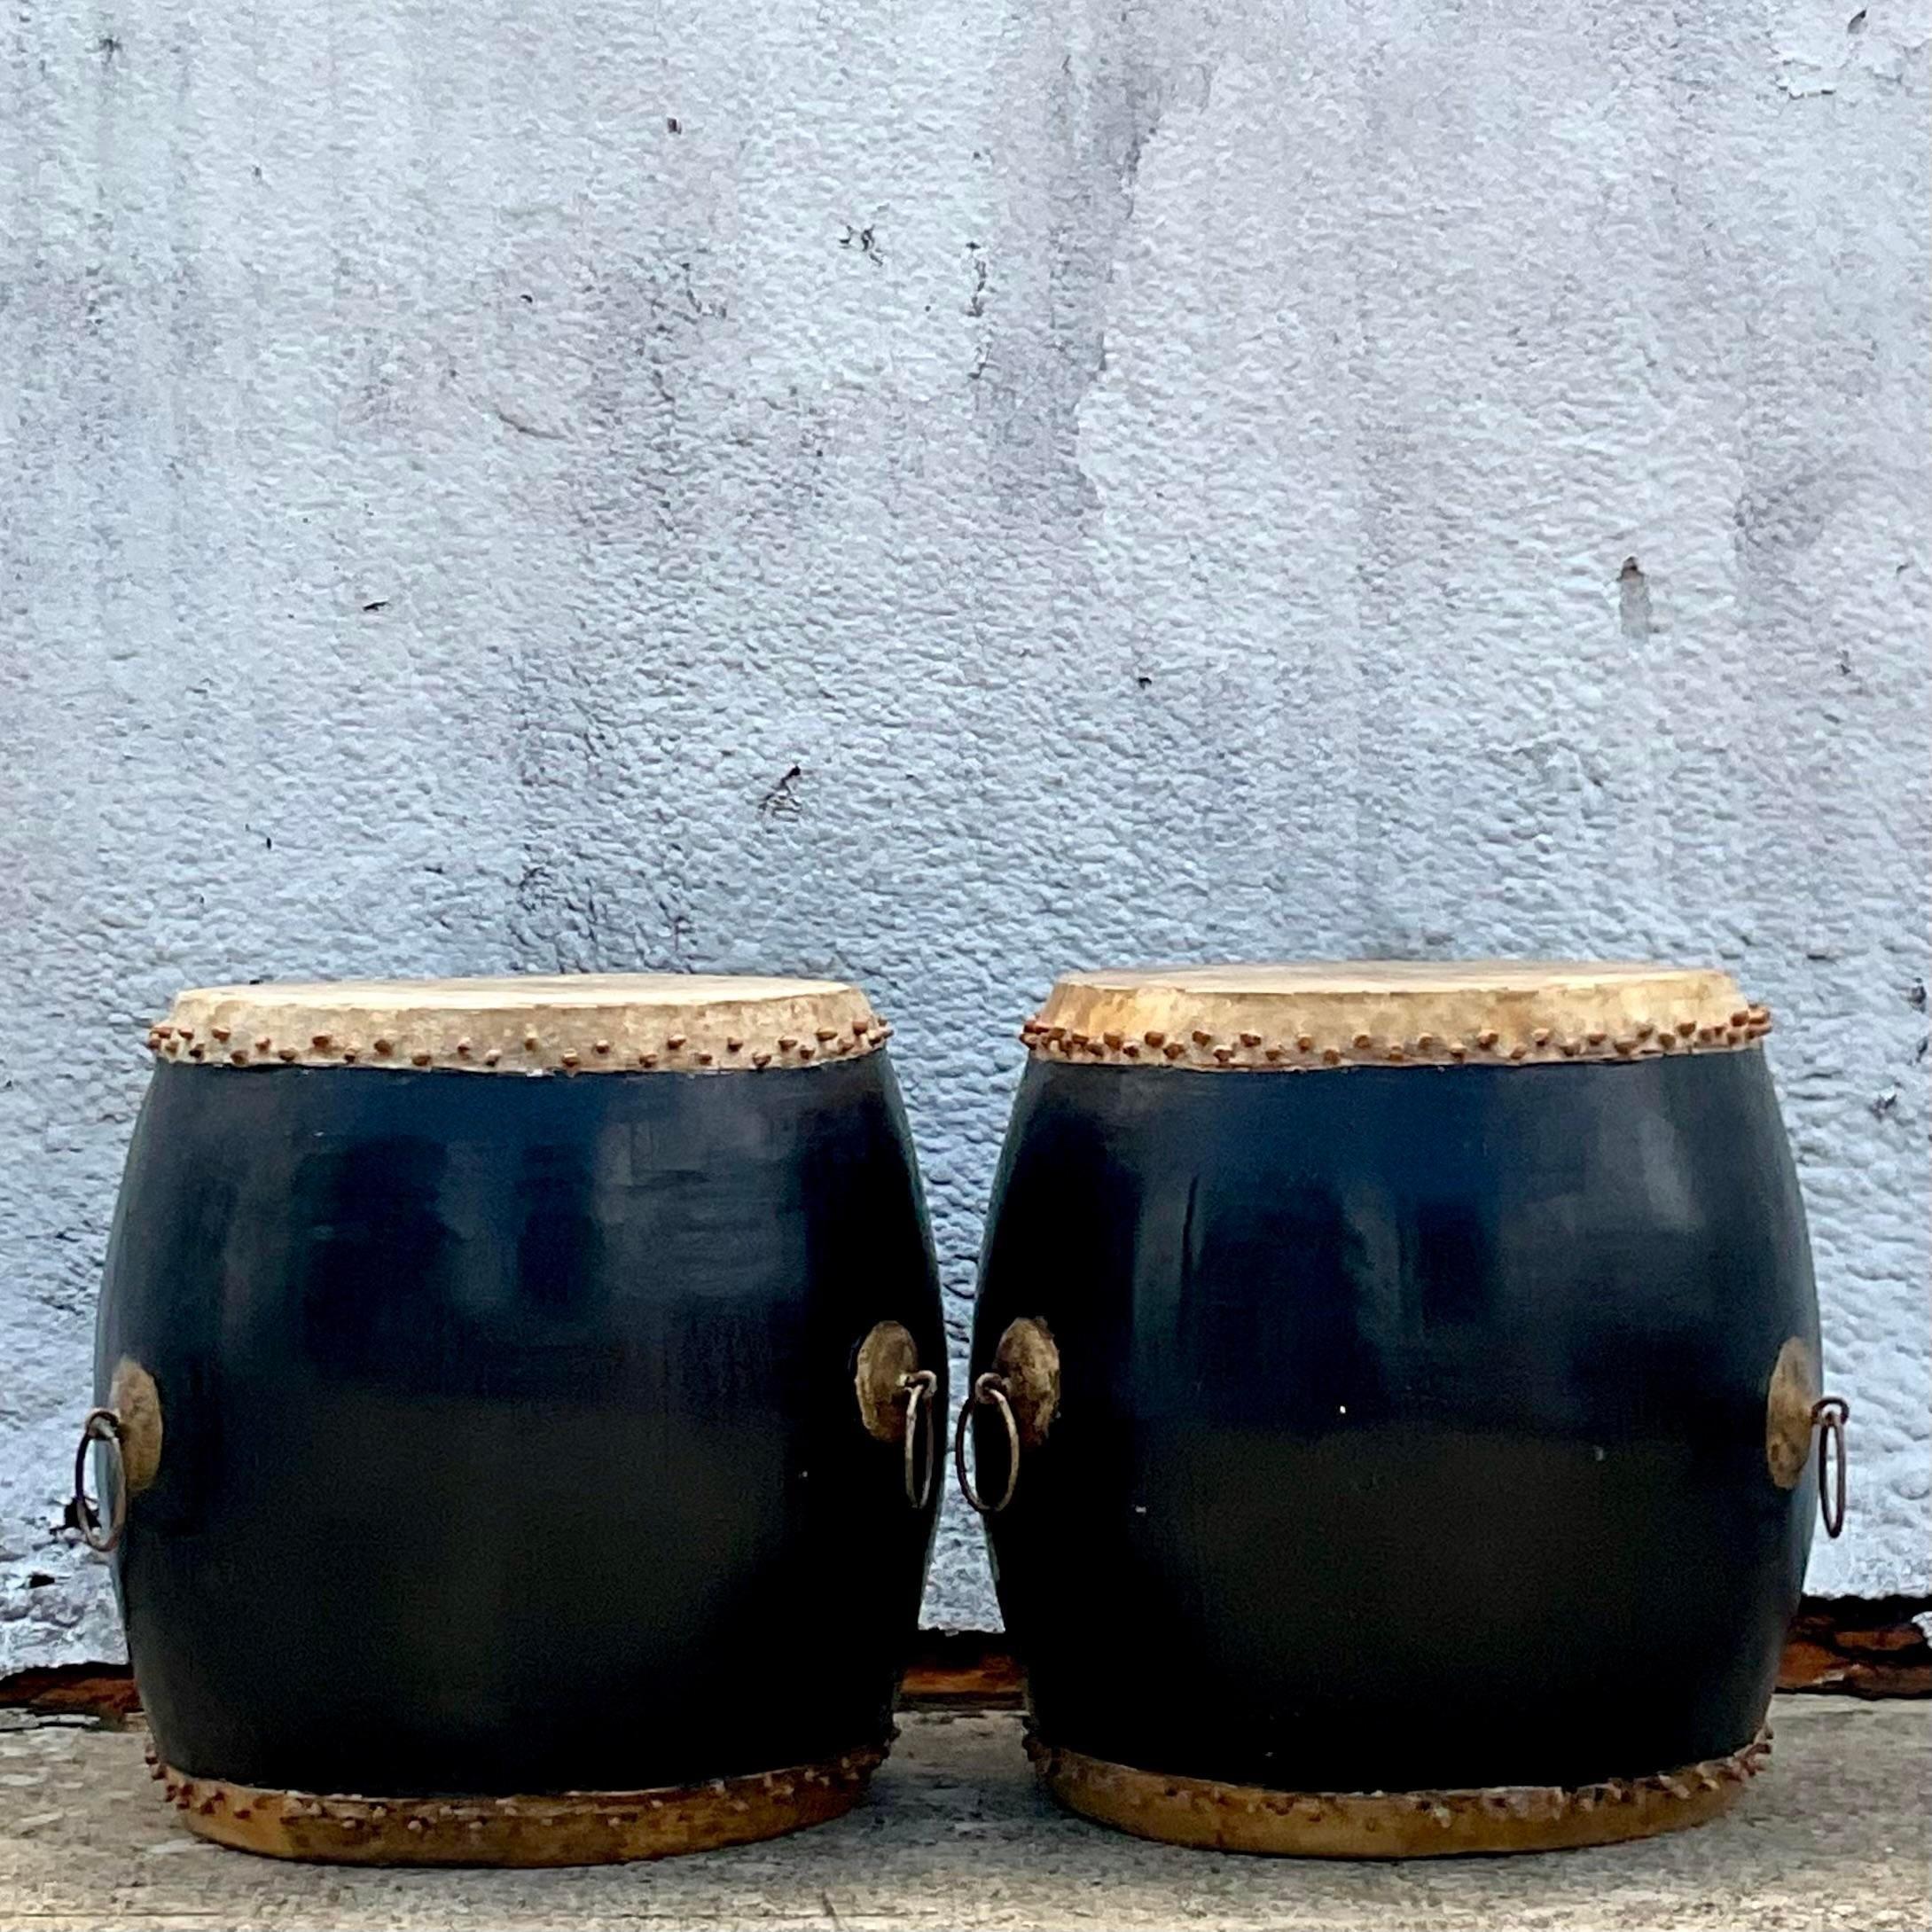 A fabulous pair vintage Asian Side tables. A chic pair of black lacquered barrel bases with a deer skin hide top. Large patinated rings for extra drama. Just add glass to extend the surface area if needed. Acquired from a Palm Beach estate.